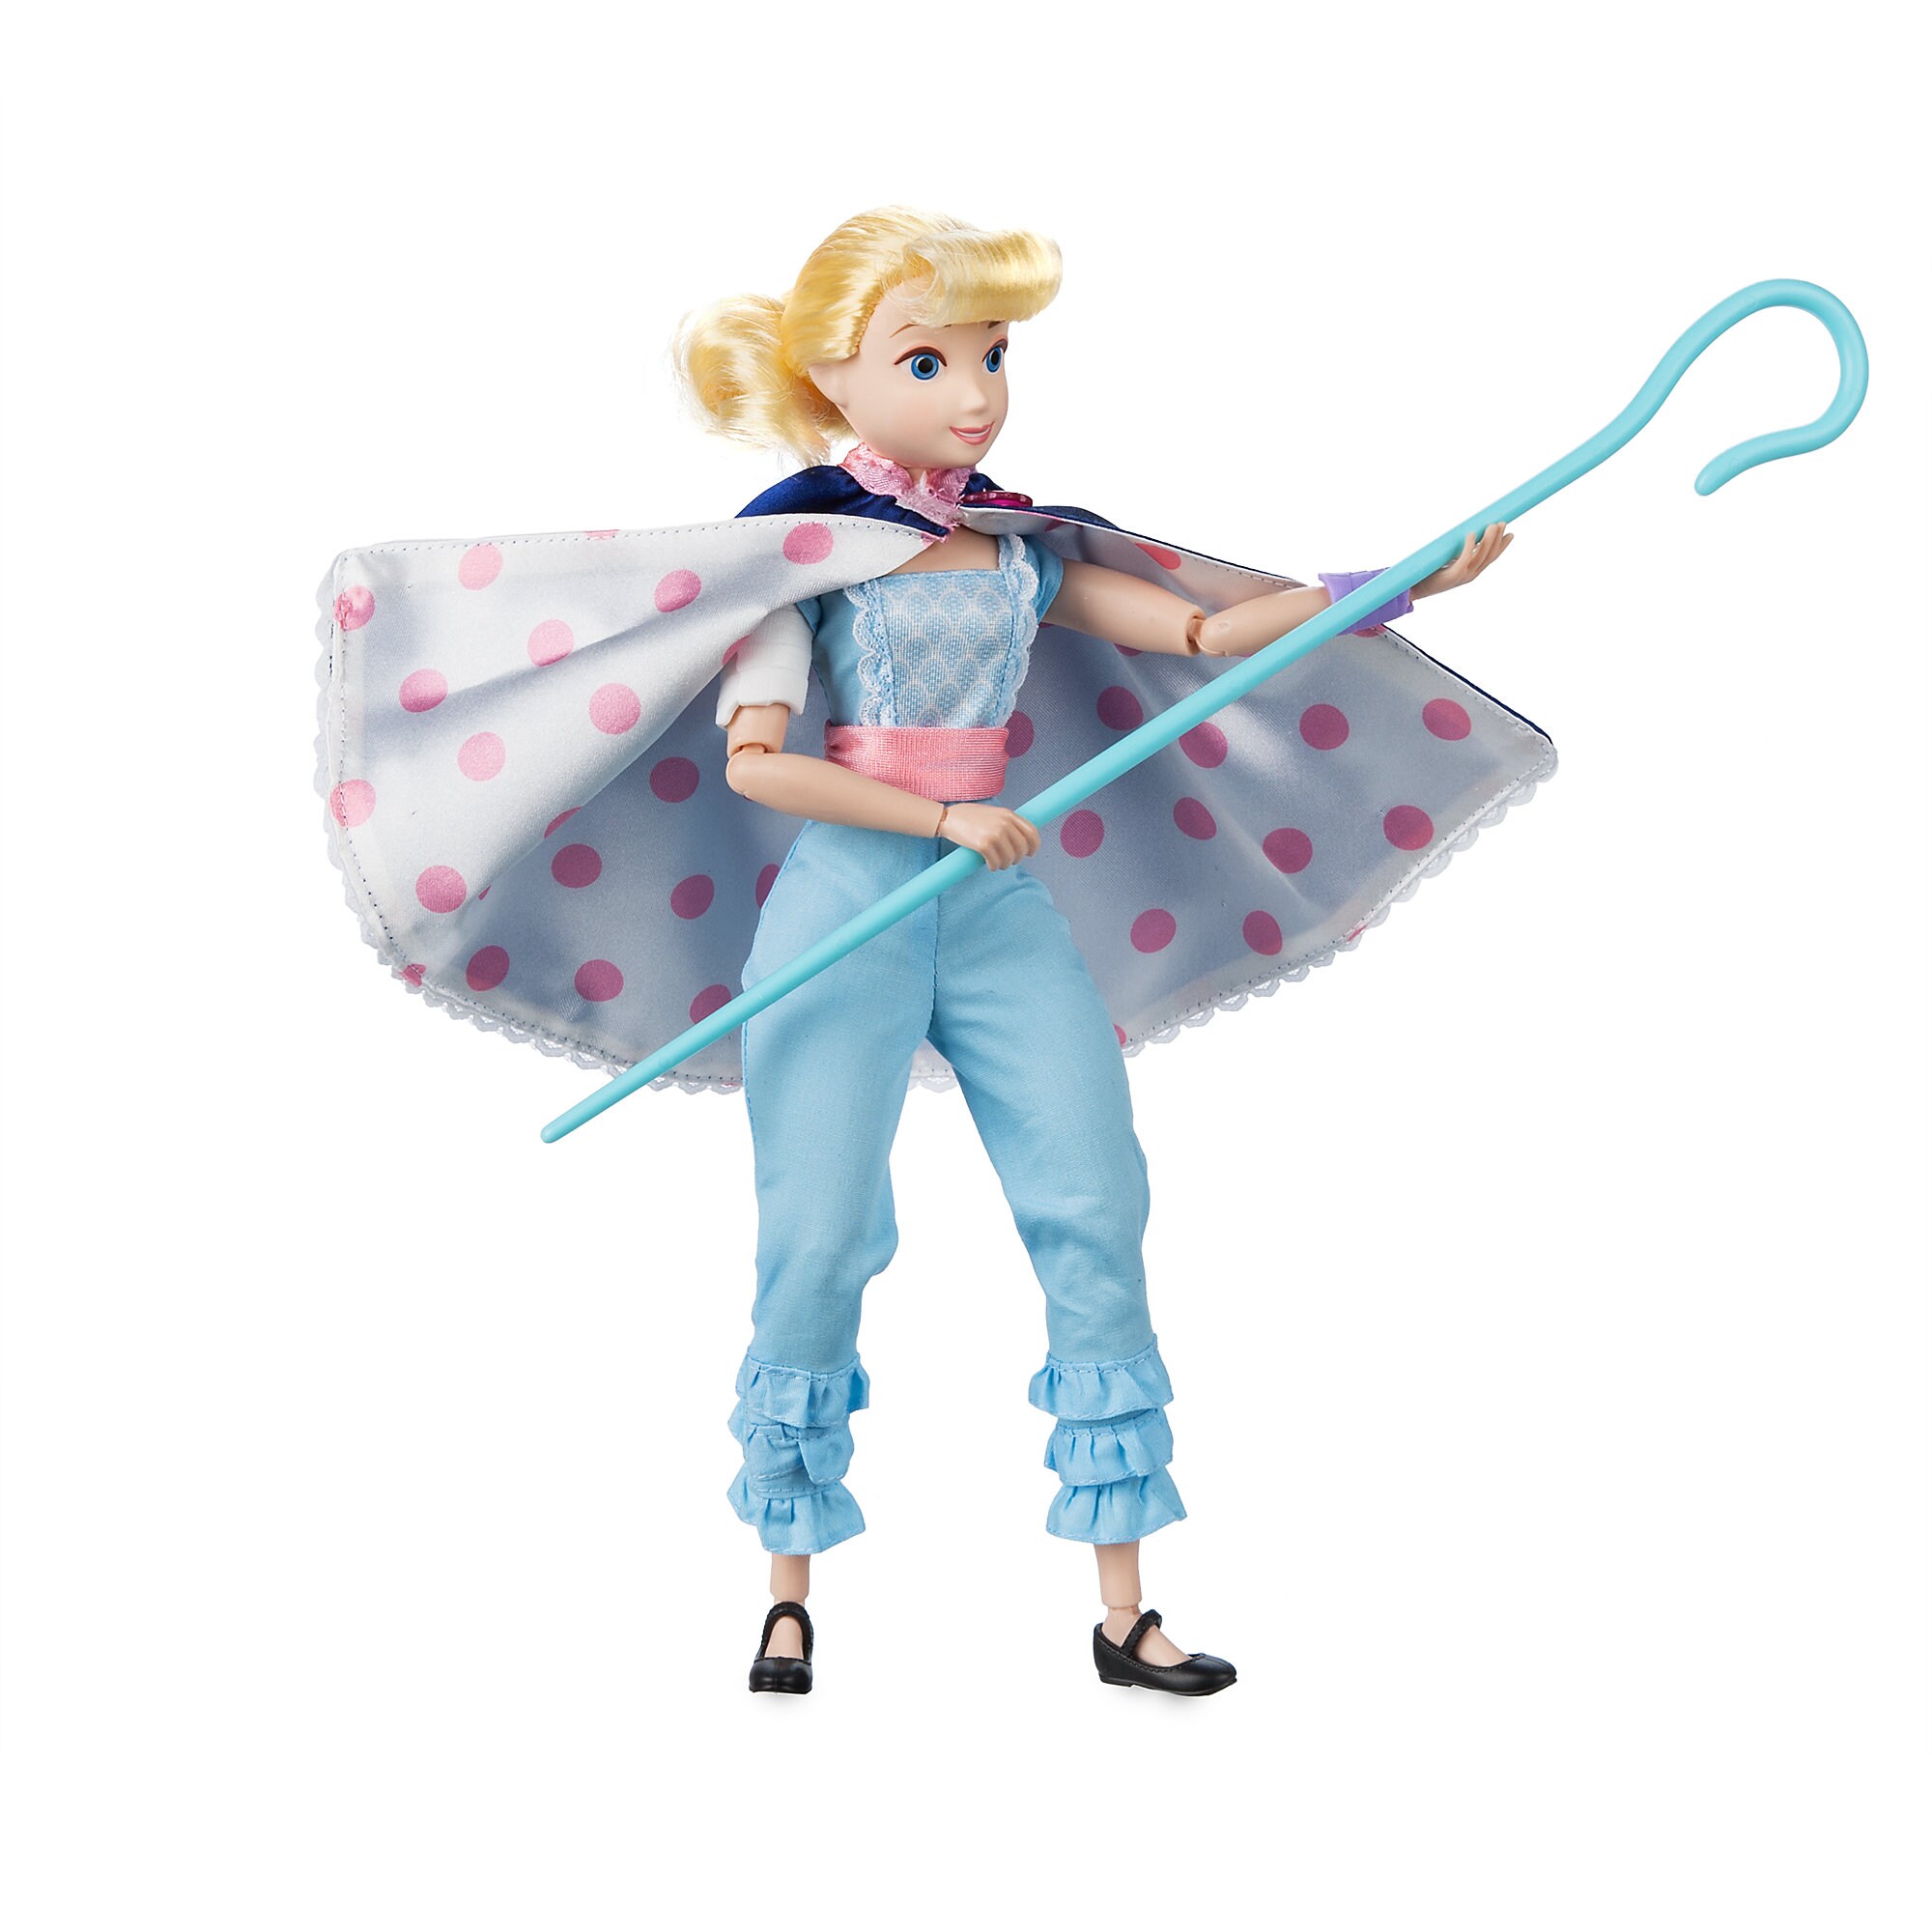 Bo Peep Epic Moves Action Doll Play Set - Toy Story 4